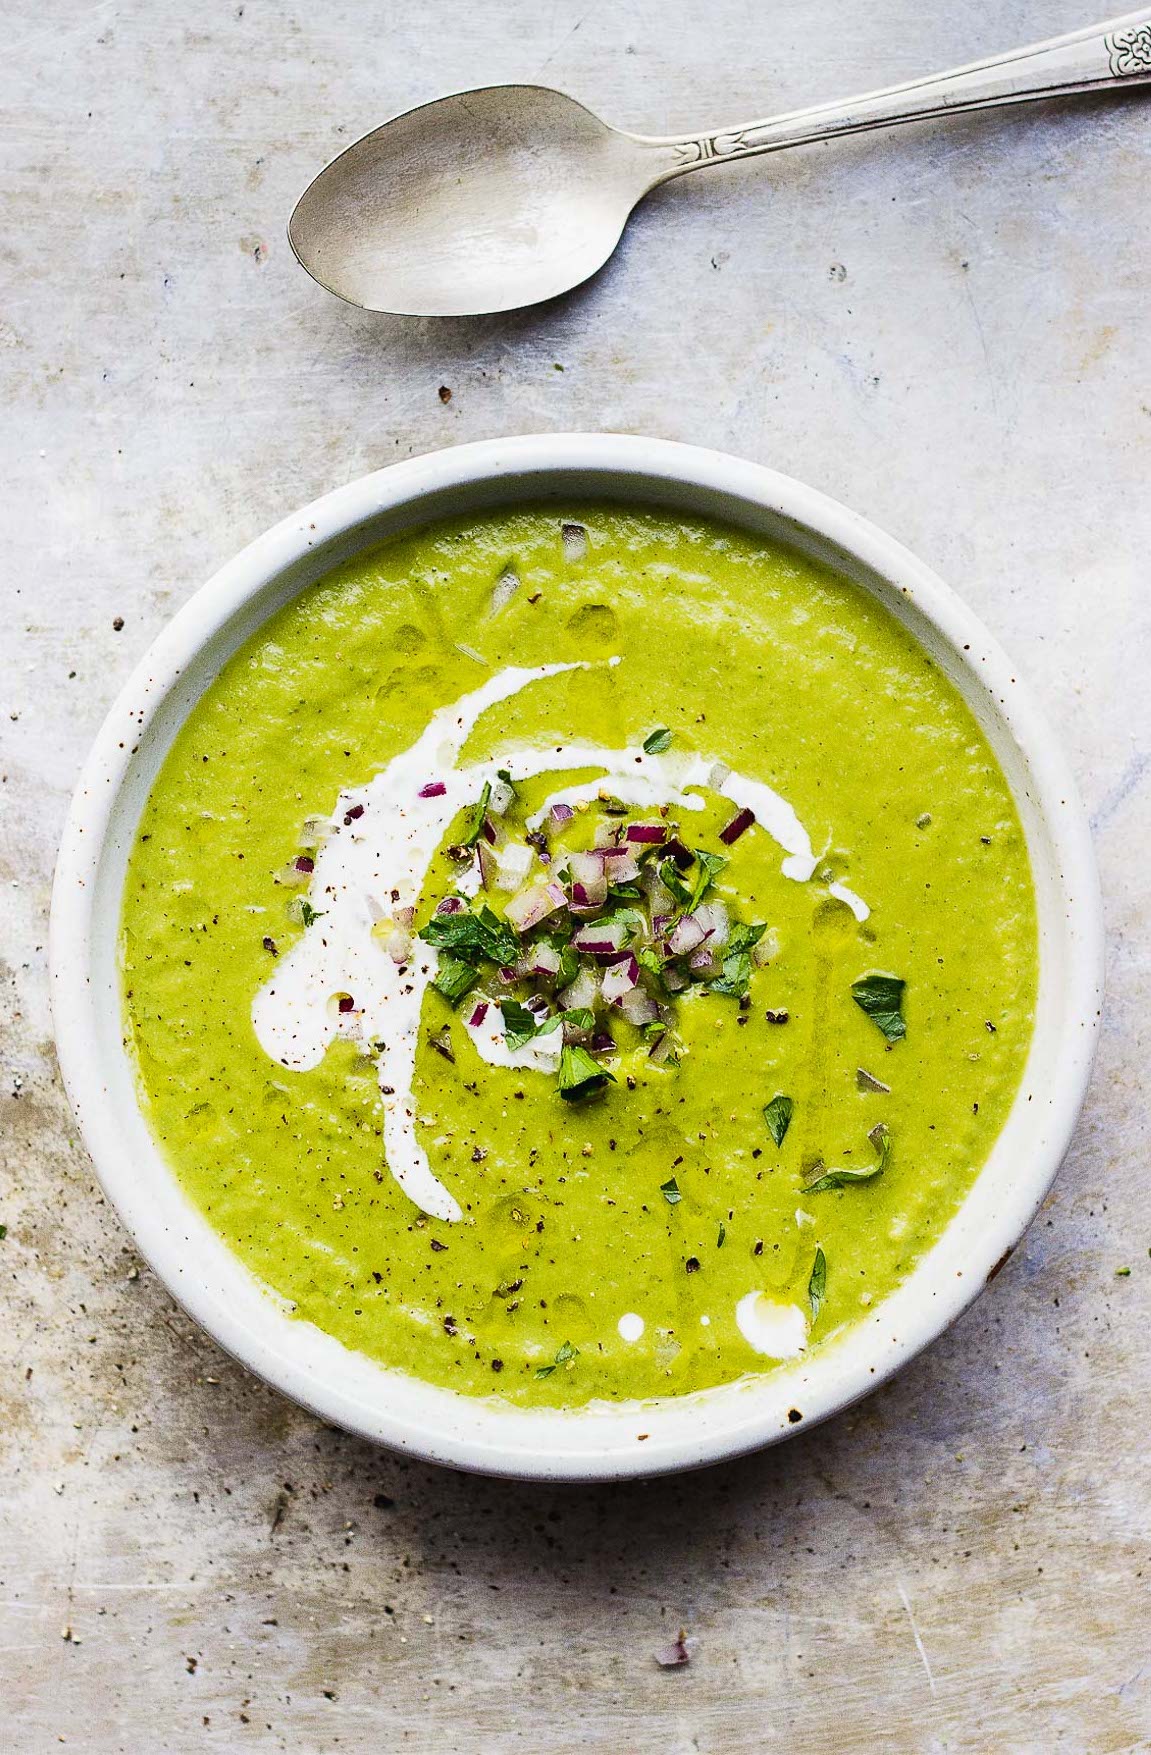 THIRTEEN VEGETARIAN SOUP RECIPES FOR COMFORT AND WARMTH